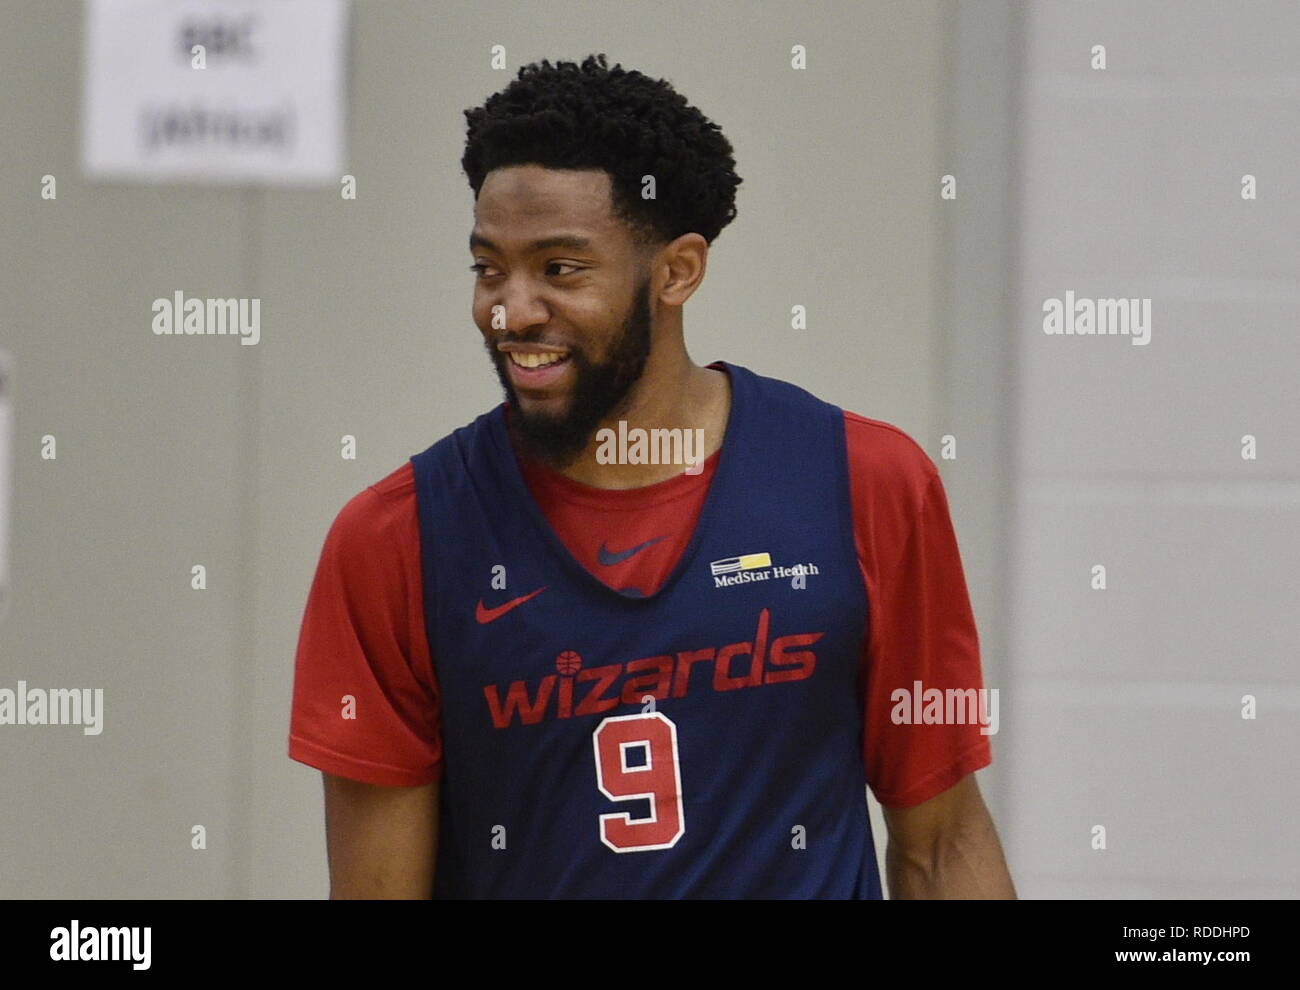 London, UK. 16th Jan, 2019. US basketball player Chasson Randle is seen during a training session of the Washington Wizards team in London, Britain, on January 16, 2019. Credit: David Svab/CTK Photo/Alamy Live News Stock Photo